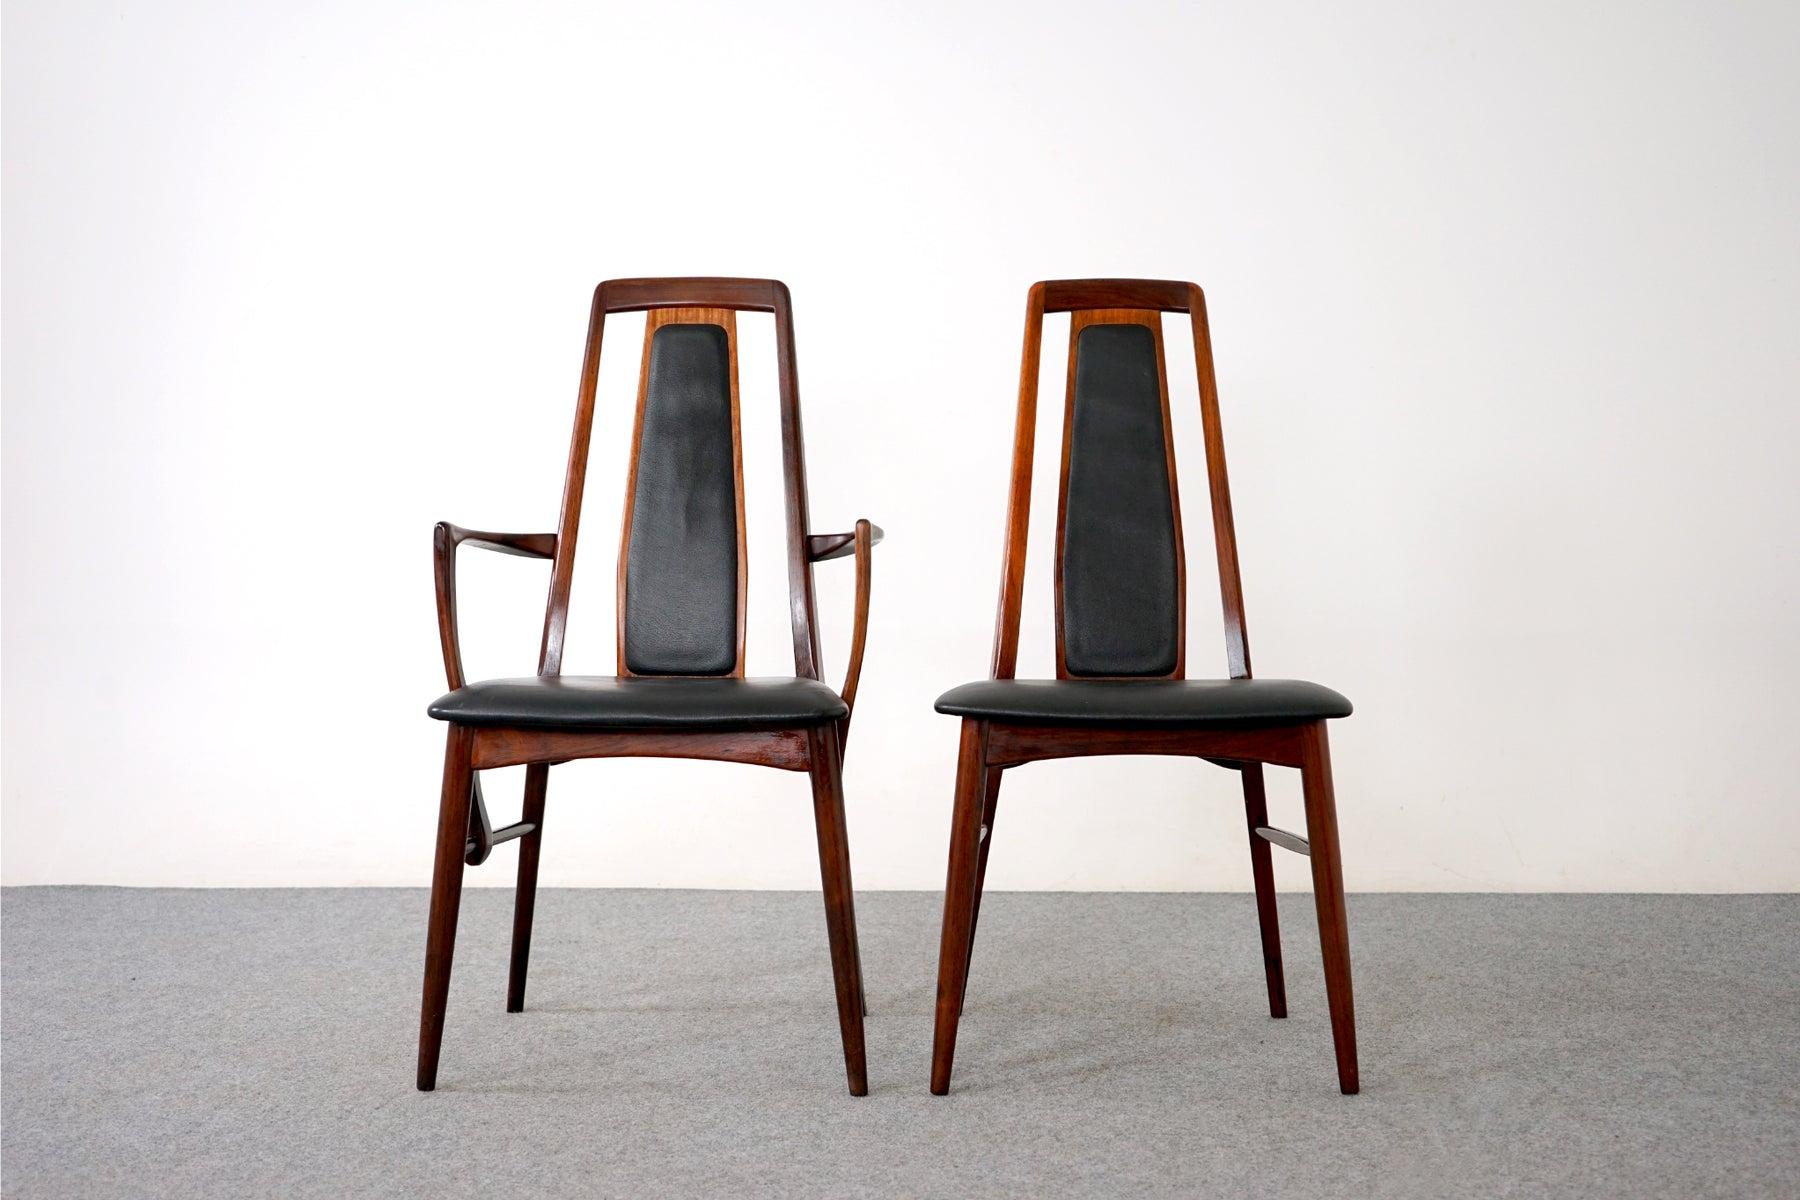 Rosewood dining chairs by Niels Koefoed for Hornslet, circa 1960's. Pure elegance! Beautifully curved backrests and generous seat. The chairs feature a supportive and comfortable tapered high back design. Set contains two rare captains'